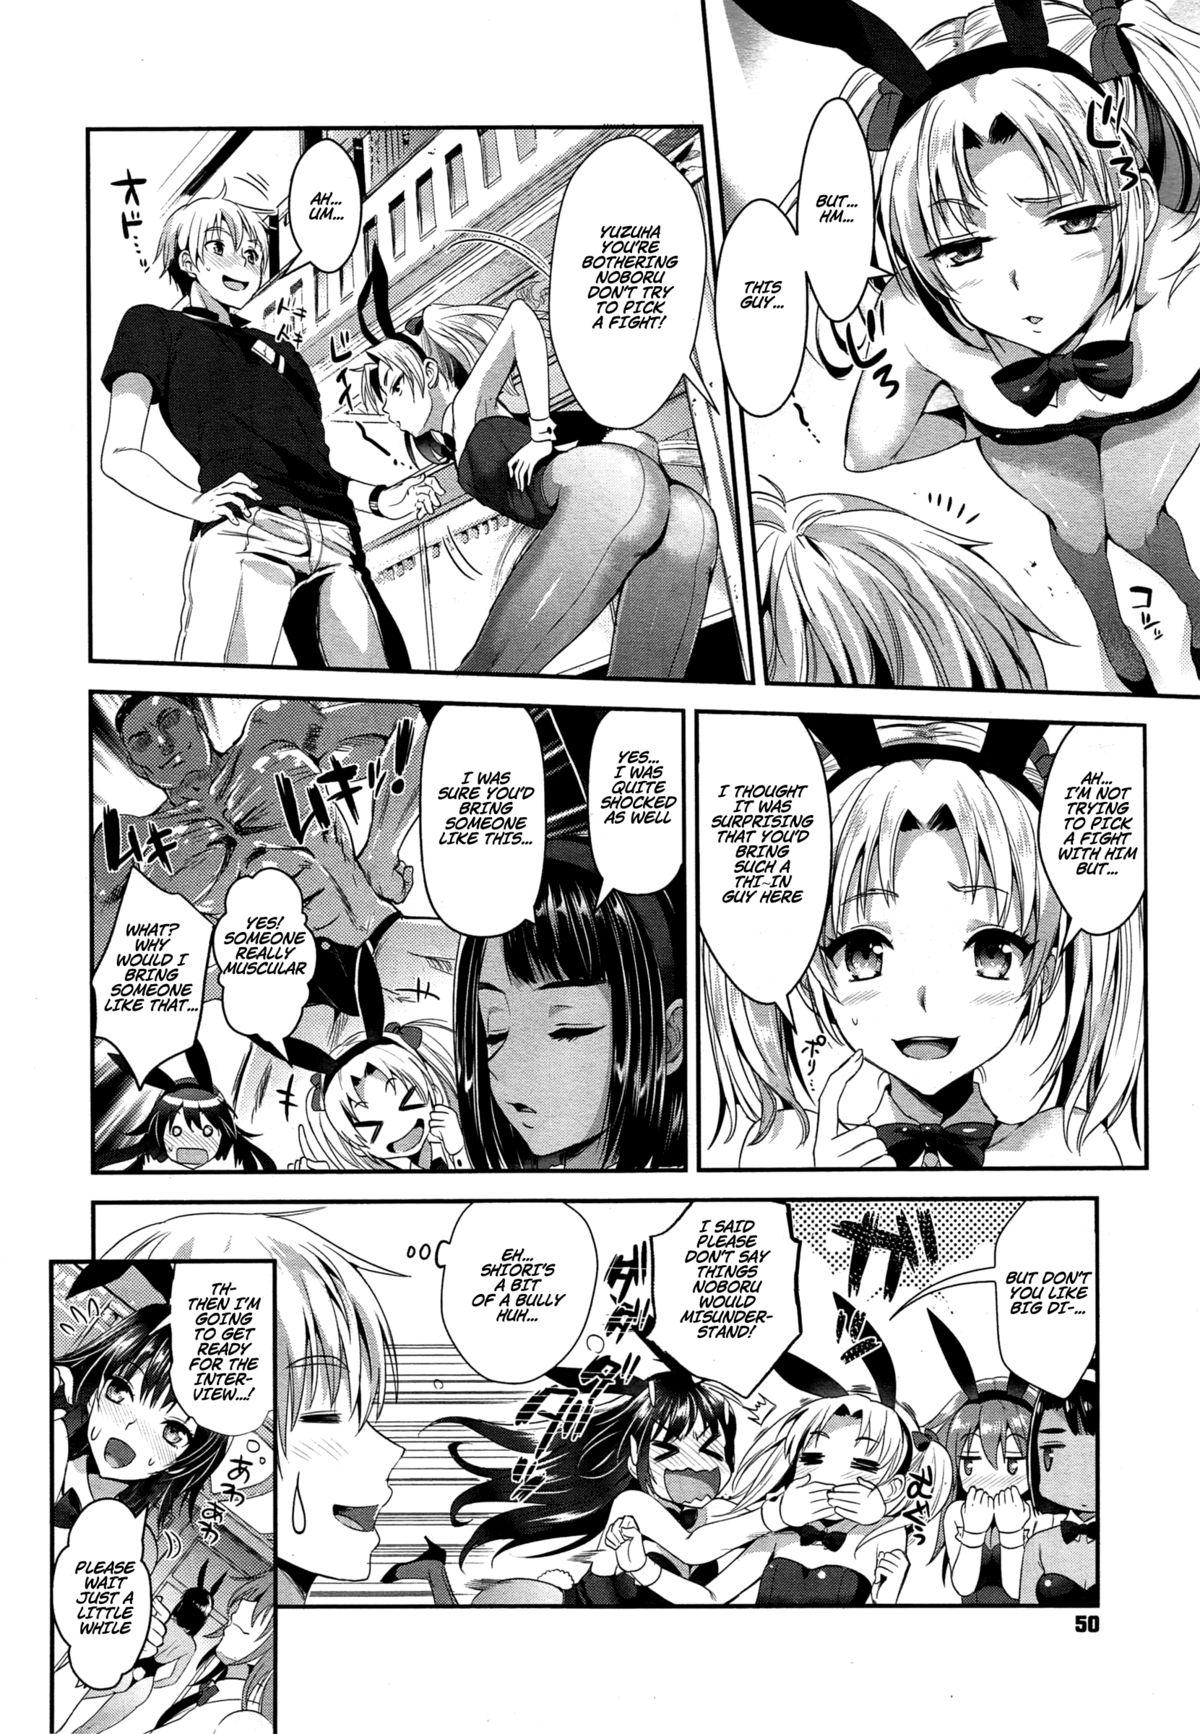 Pussy Licking Bunny Gakuen e Youkoso | Welcome to Bunny Academy Gay College - Page 4